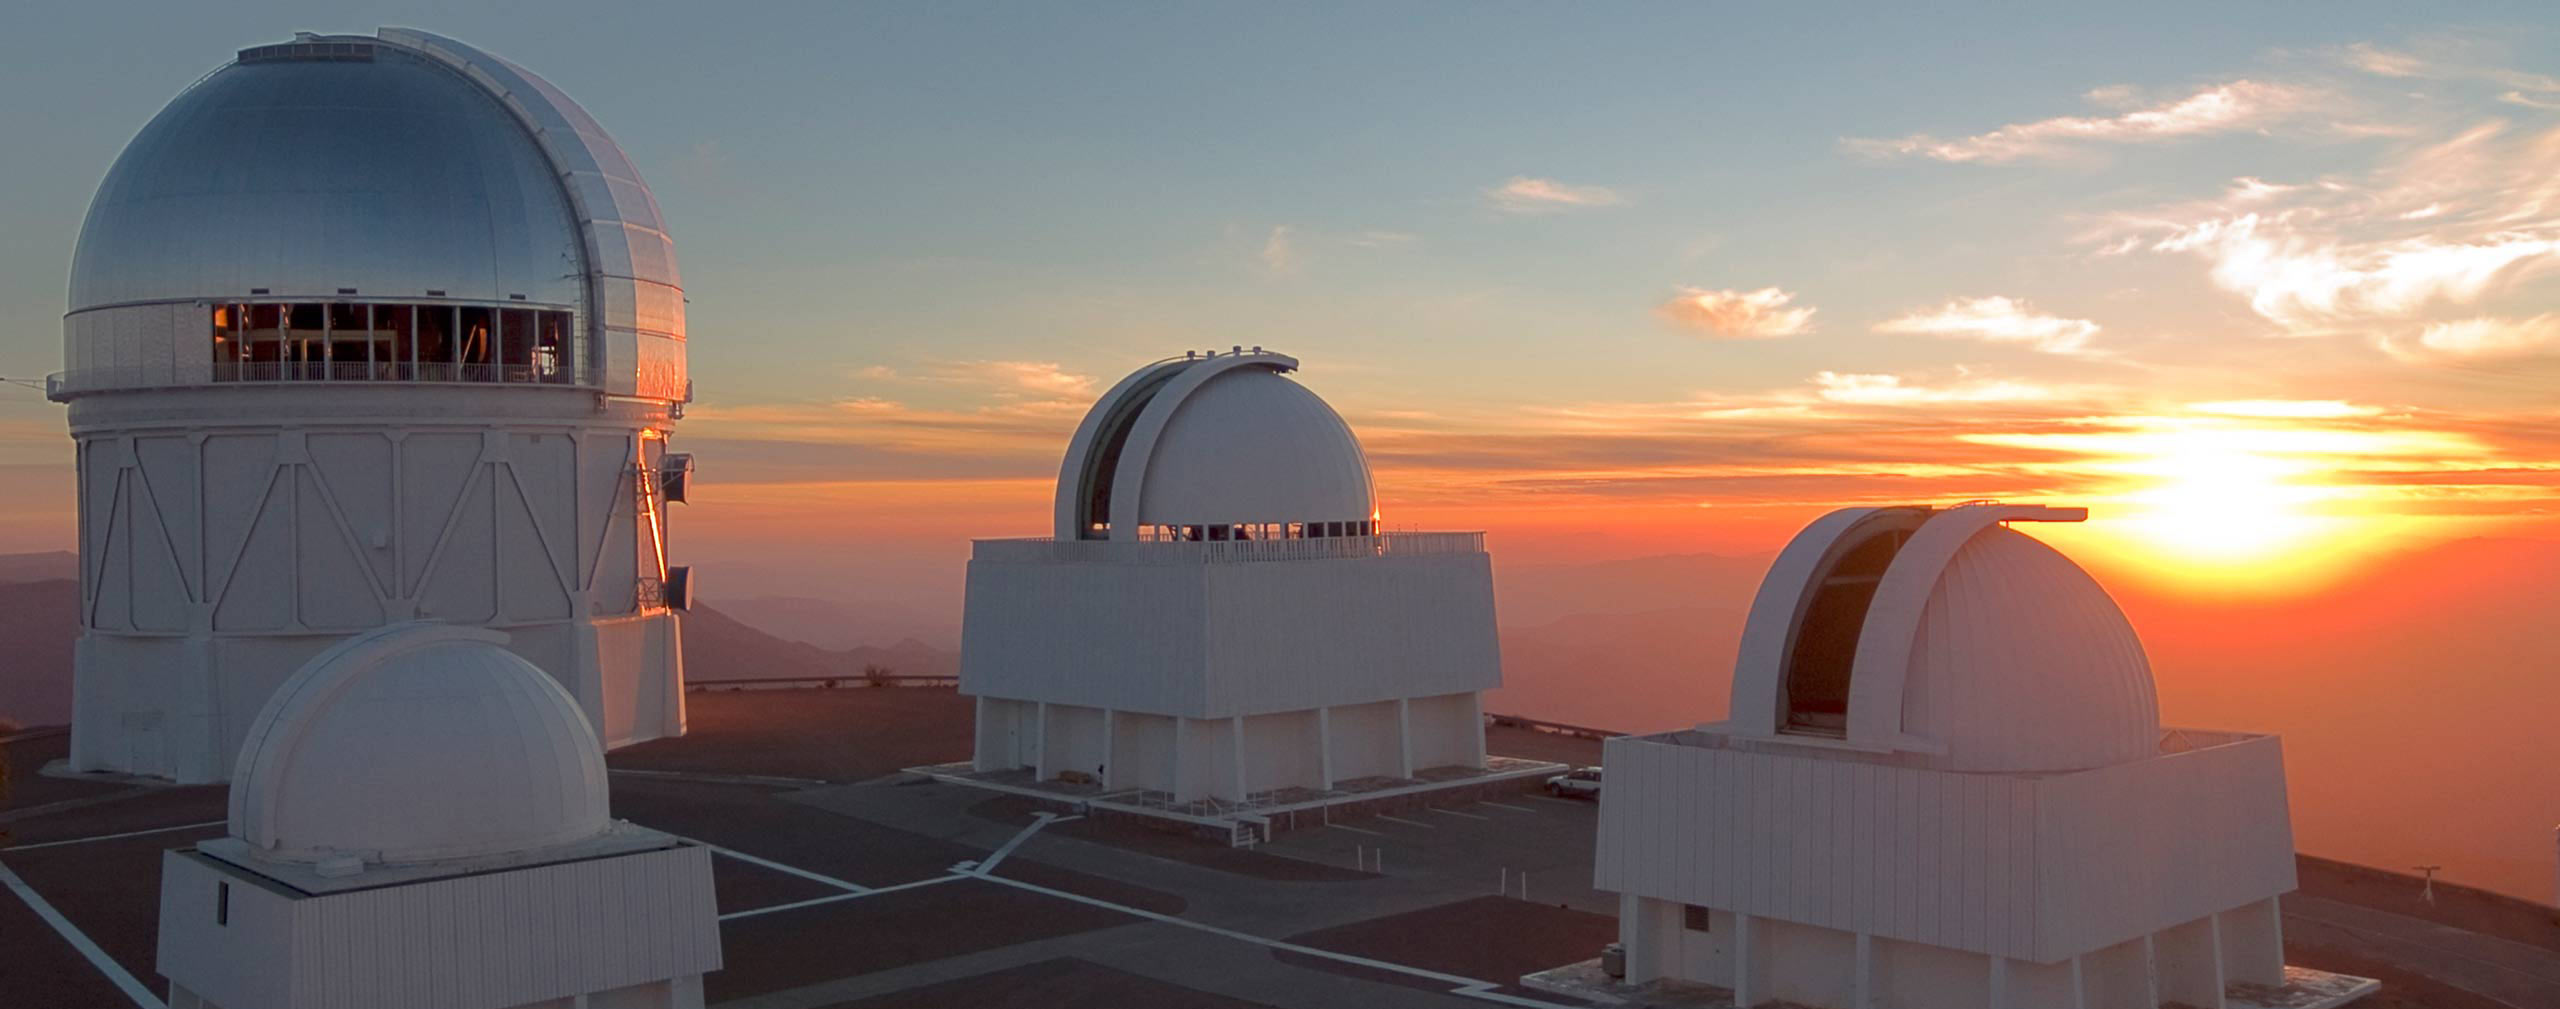 Aerial view of Cerro Tololo Inter-American Observatory looking into the sunset